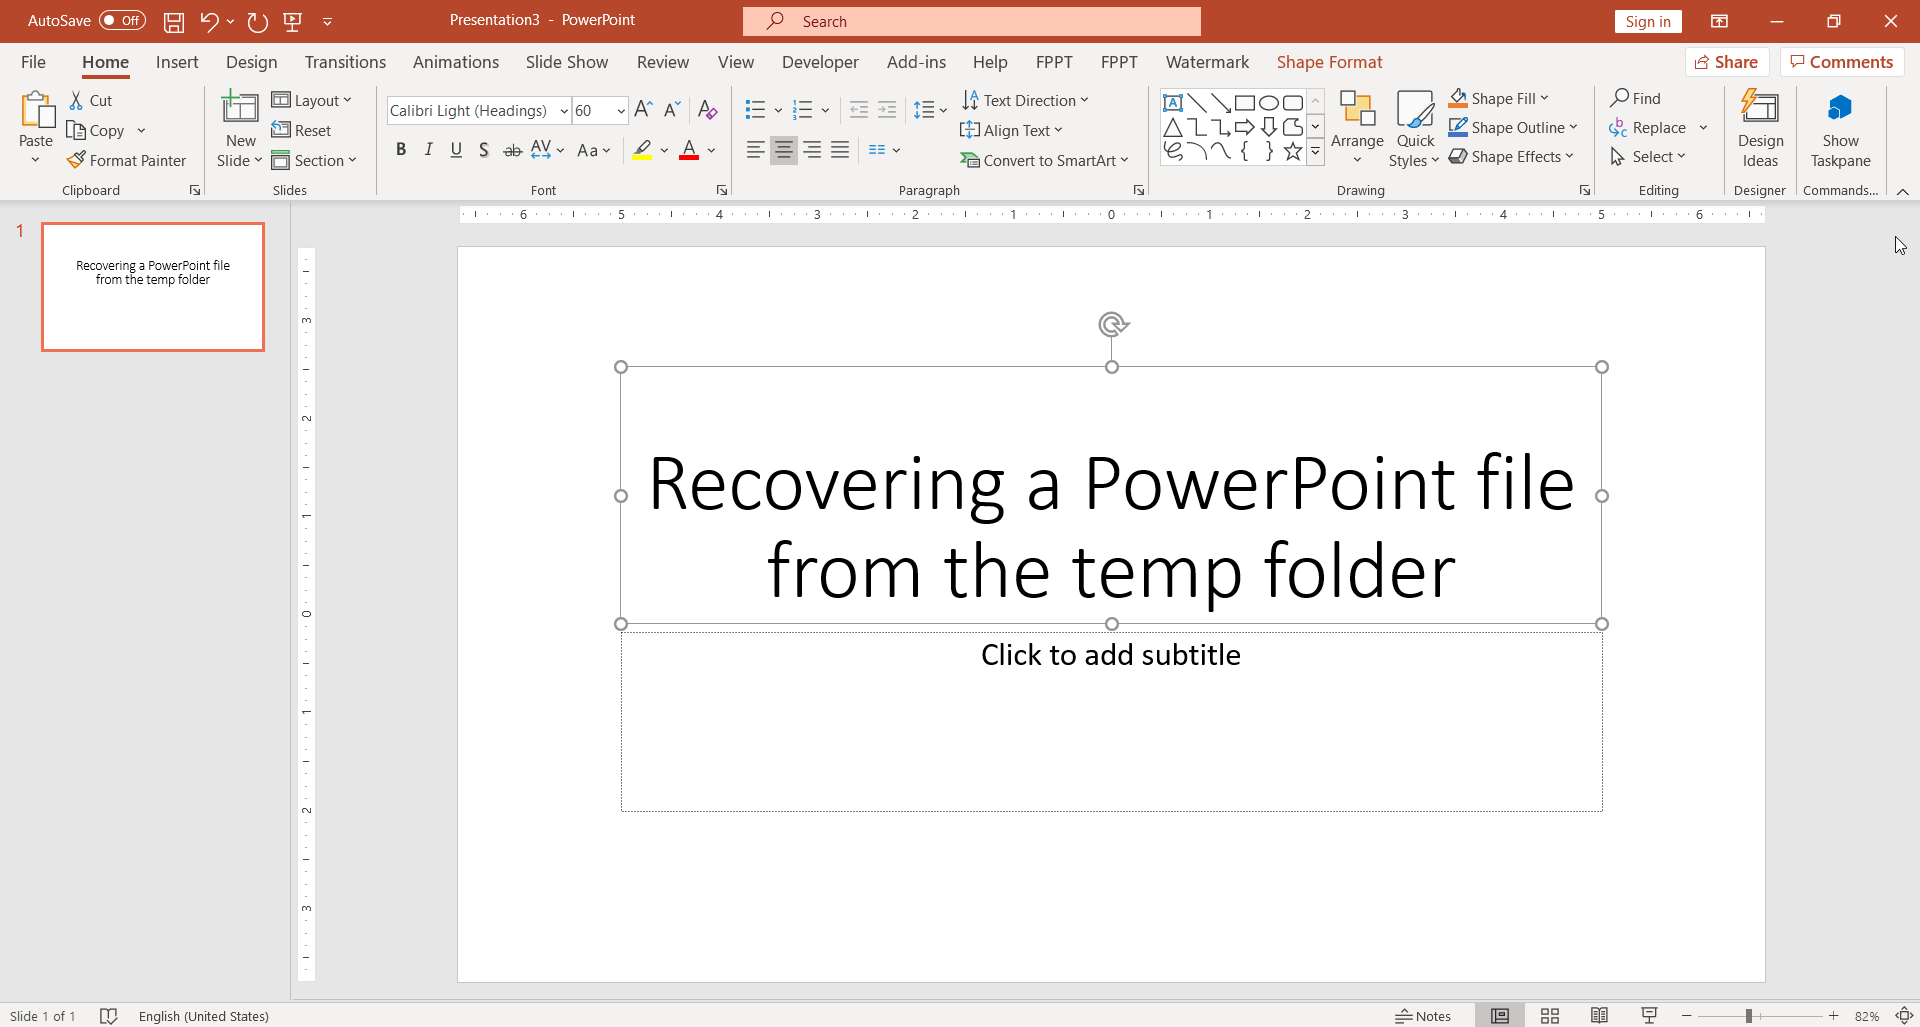 How to Recover pptx file from a temp folder in Windows (repair PowerPoint file)